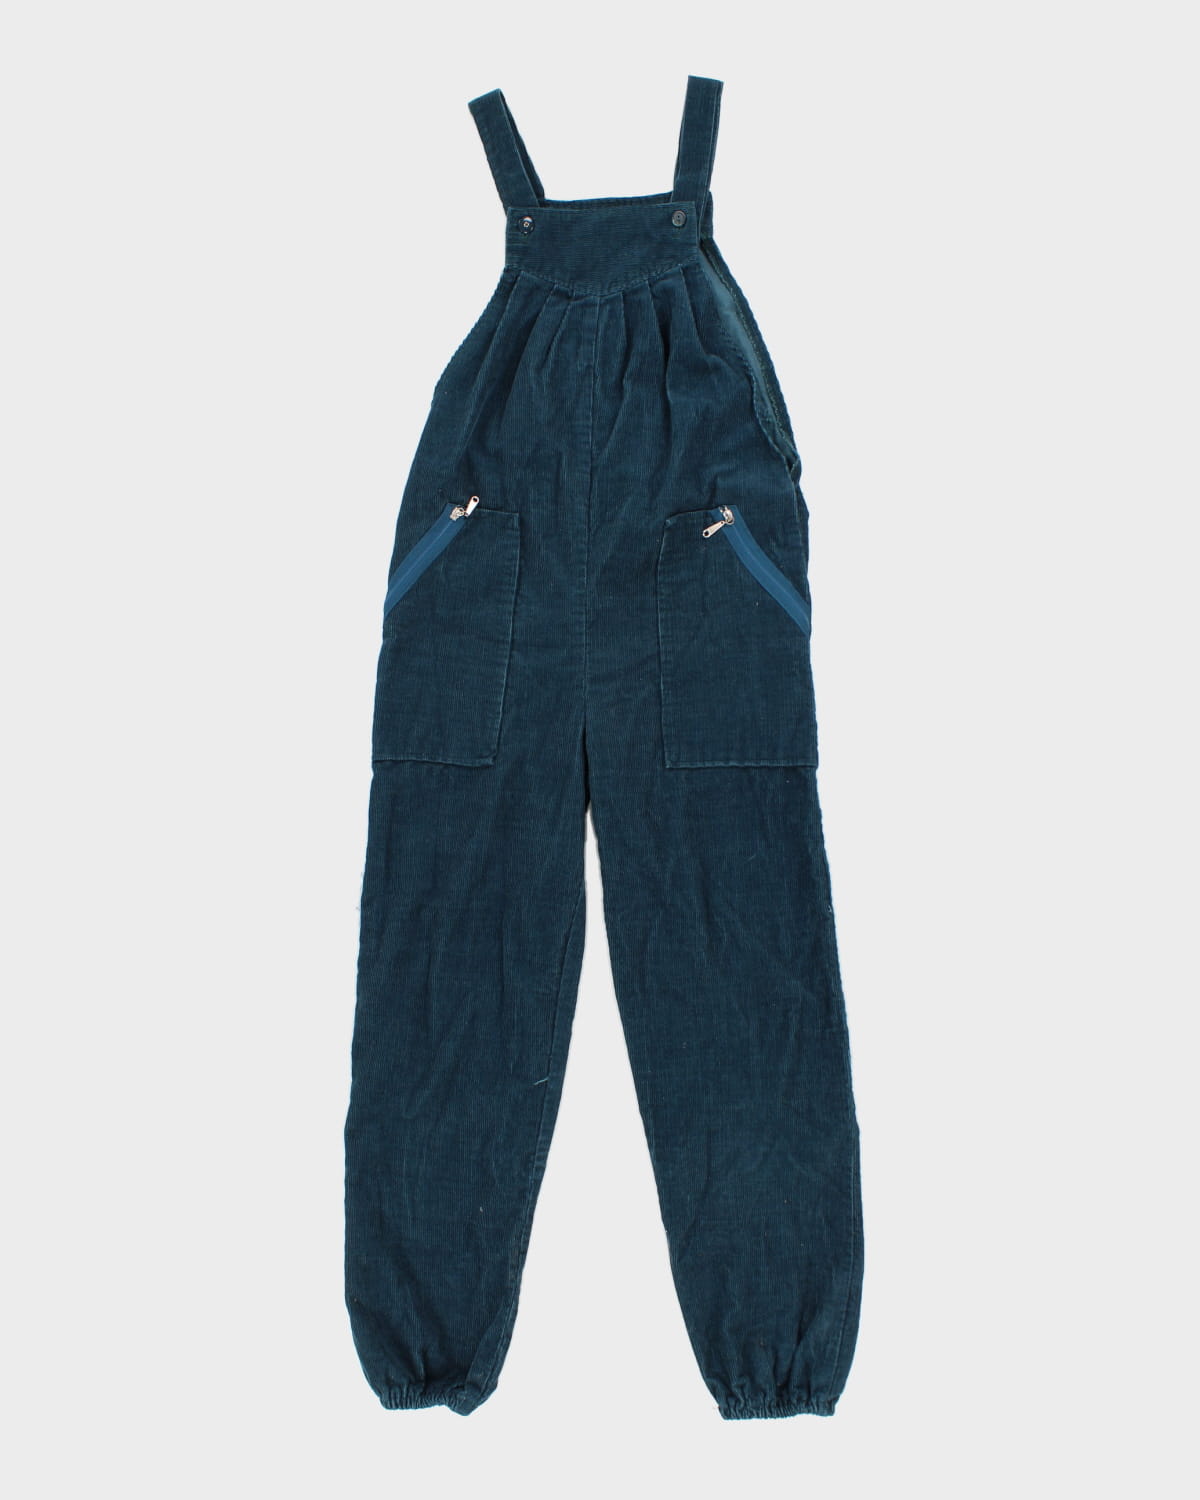 80's Vintage Turquoise Cord Dungarees - XS